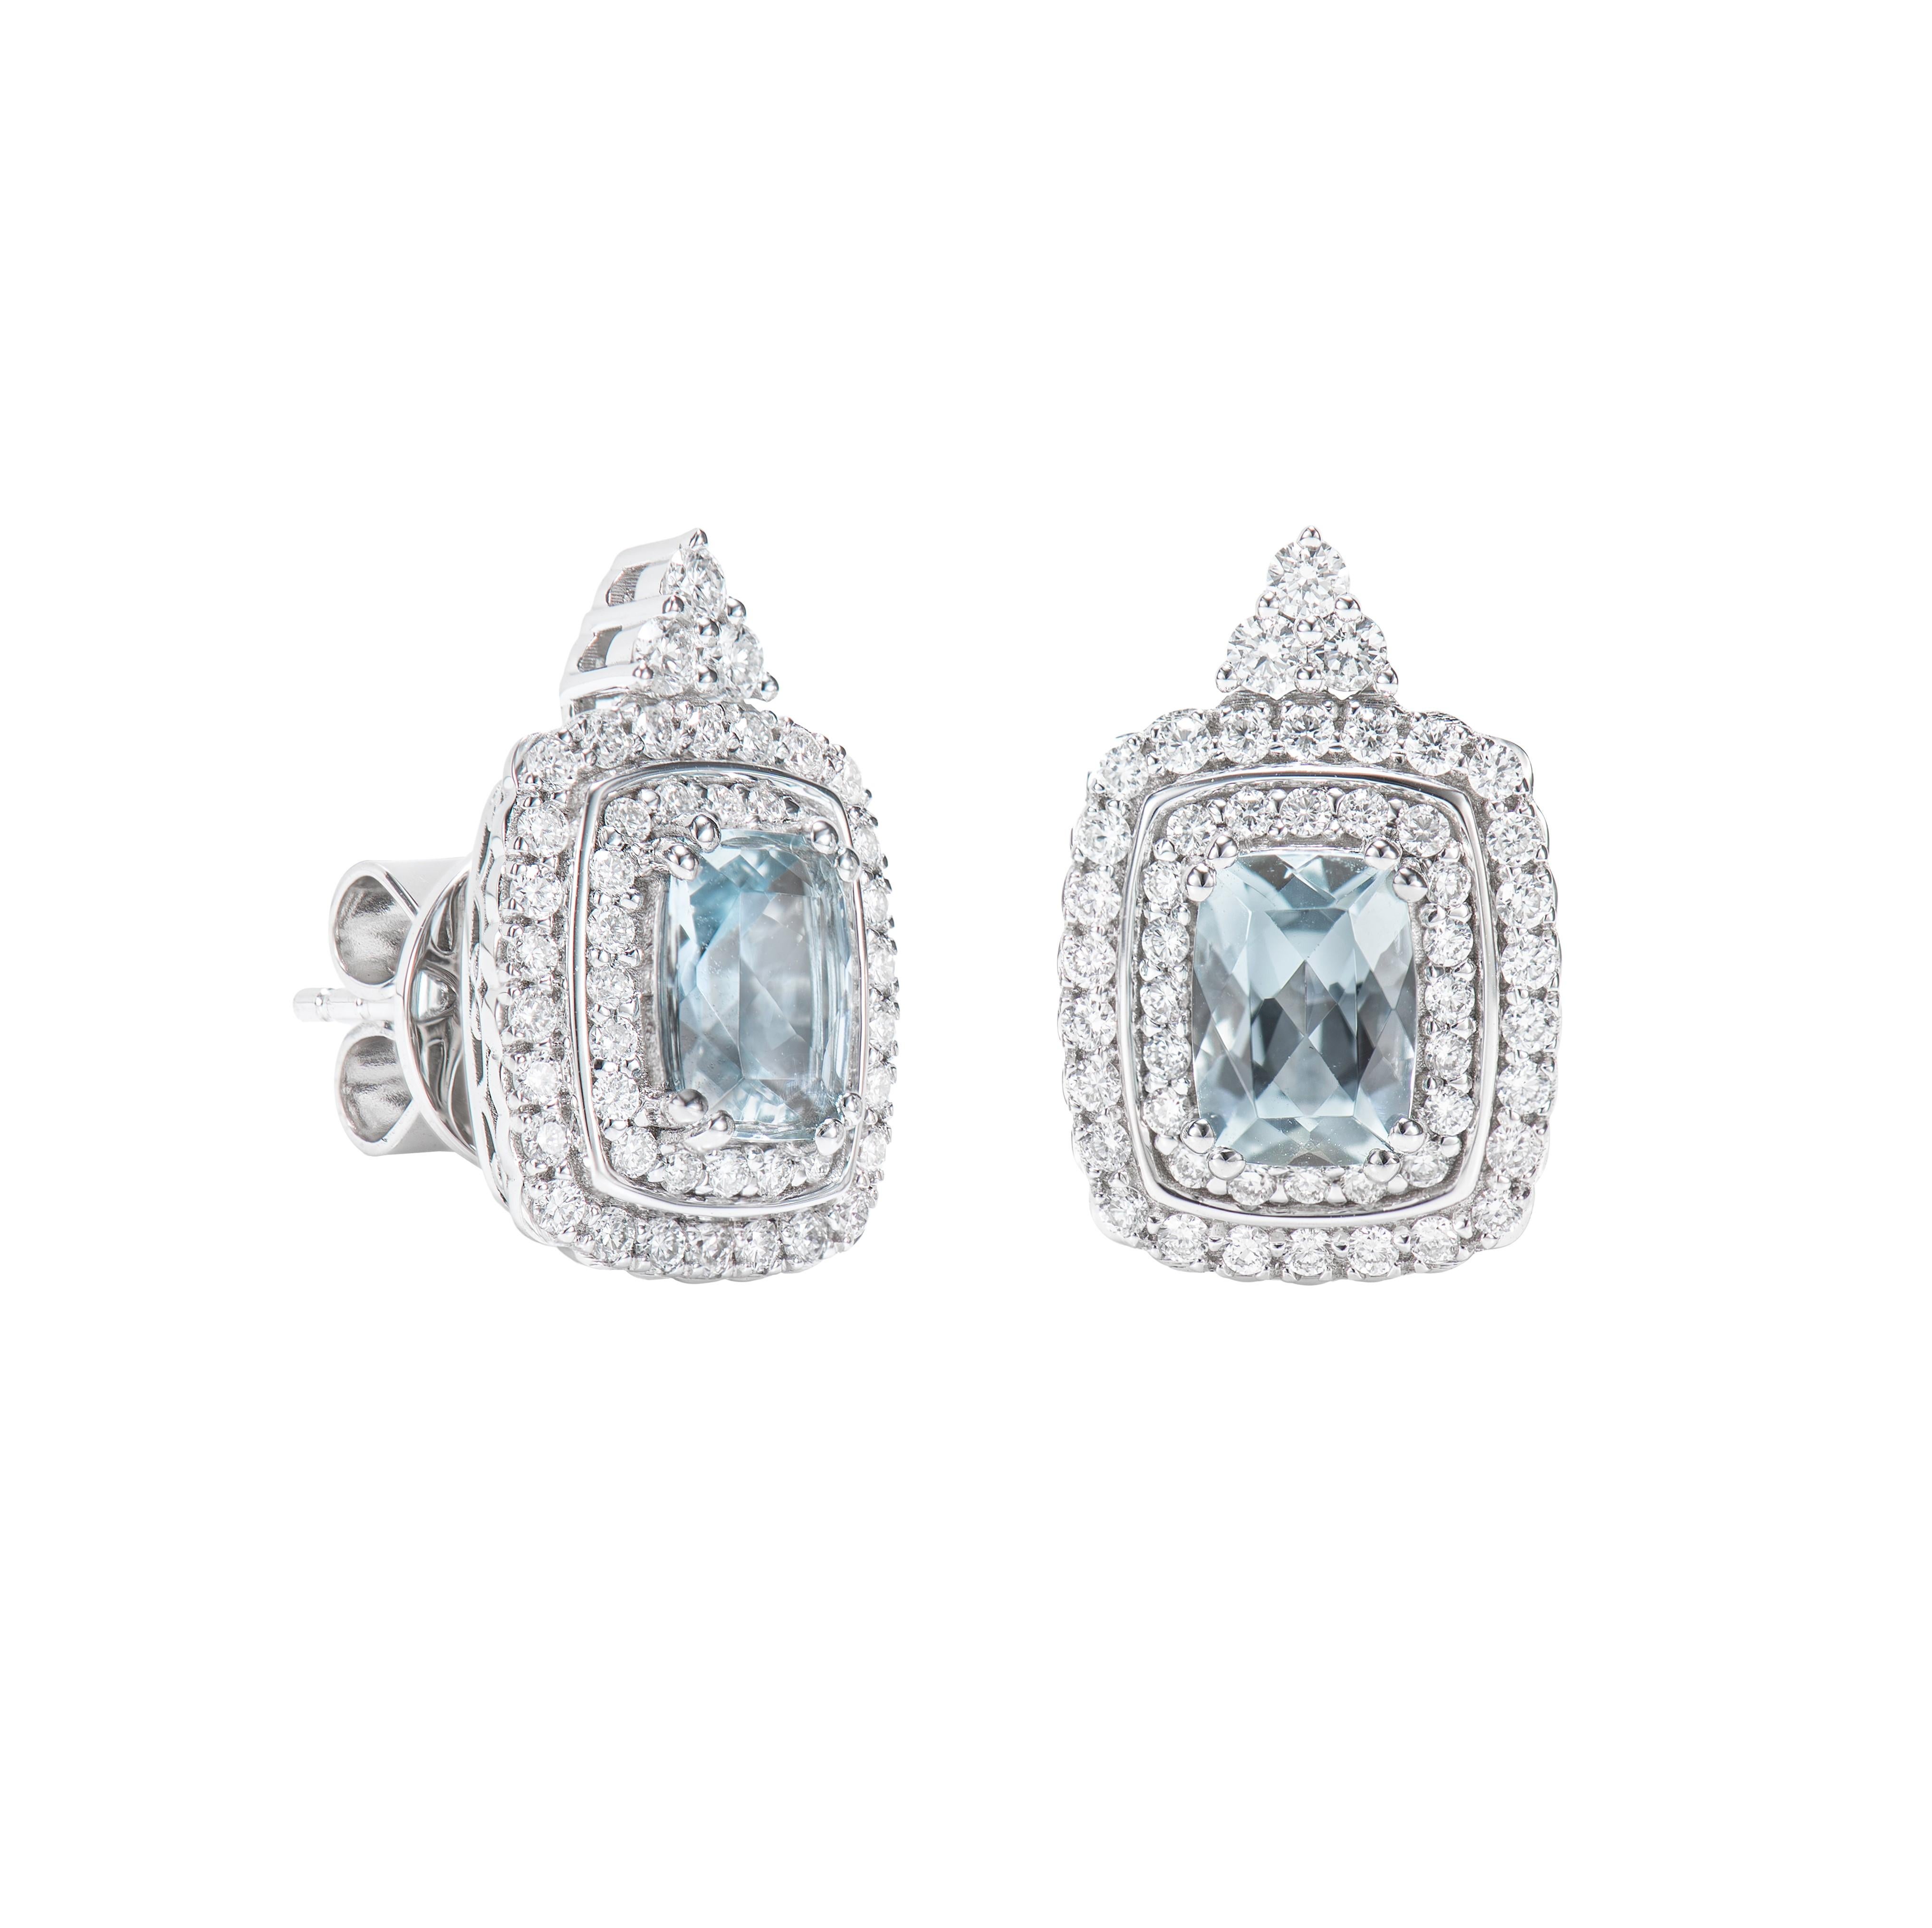 This collection features an array of aquamarines with an icy blue hue that is as cool as it gets! Accented with diamonds these Studs Earrings are made in white gold and present a classic yet elegant look. 

Aquamarine and White Diamond Studs Earring